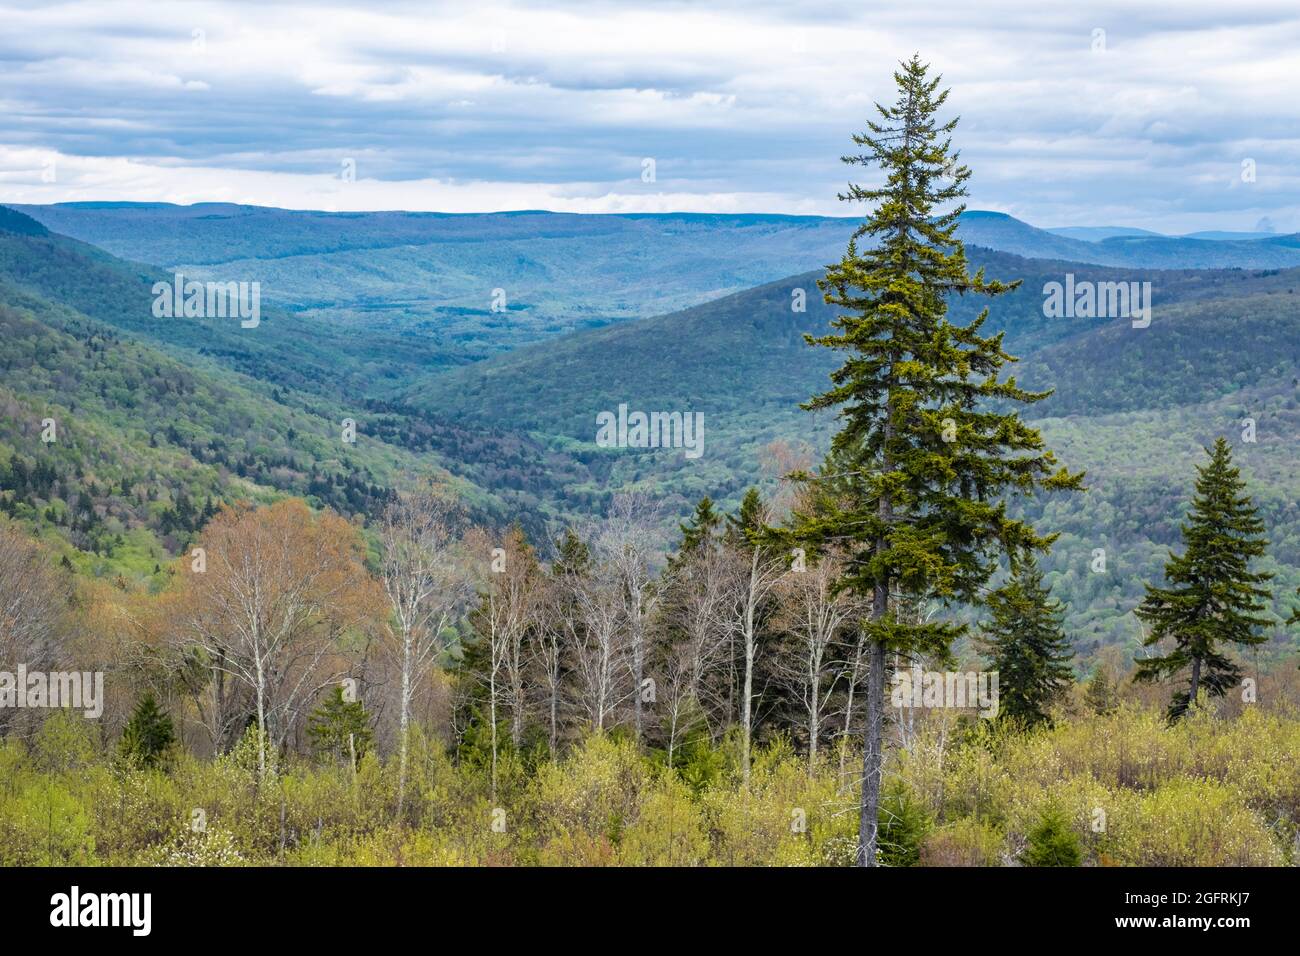 West Virginia Scenic Overlook, State Highway 150, showing new growth after clear cutting of forest. Late spring. Stock Photo